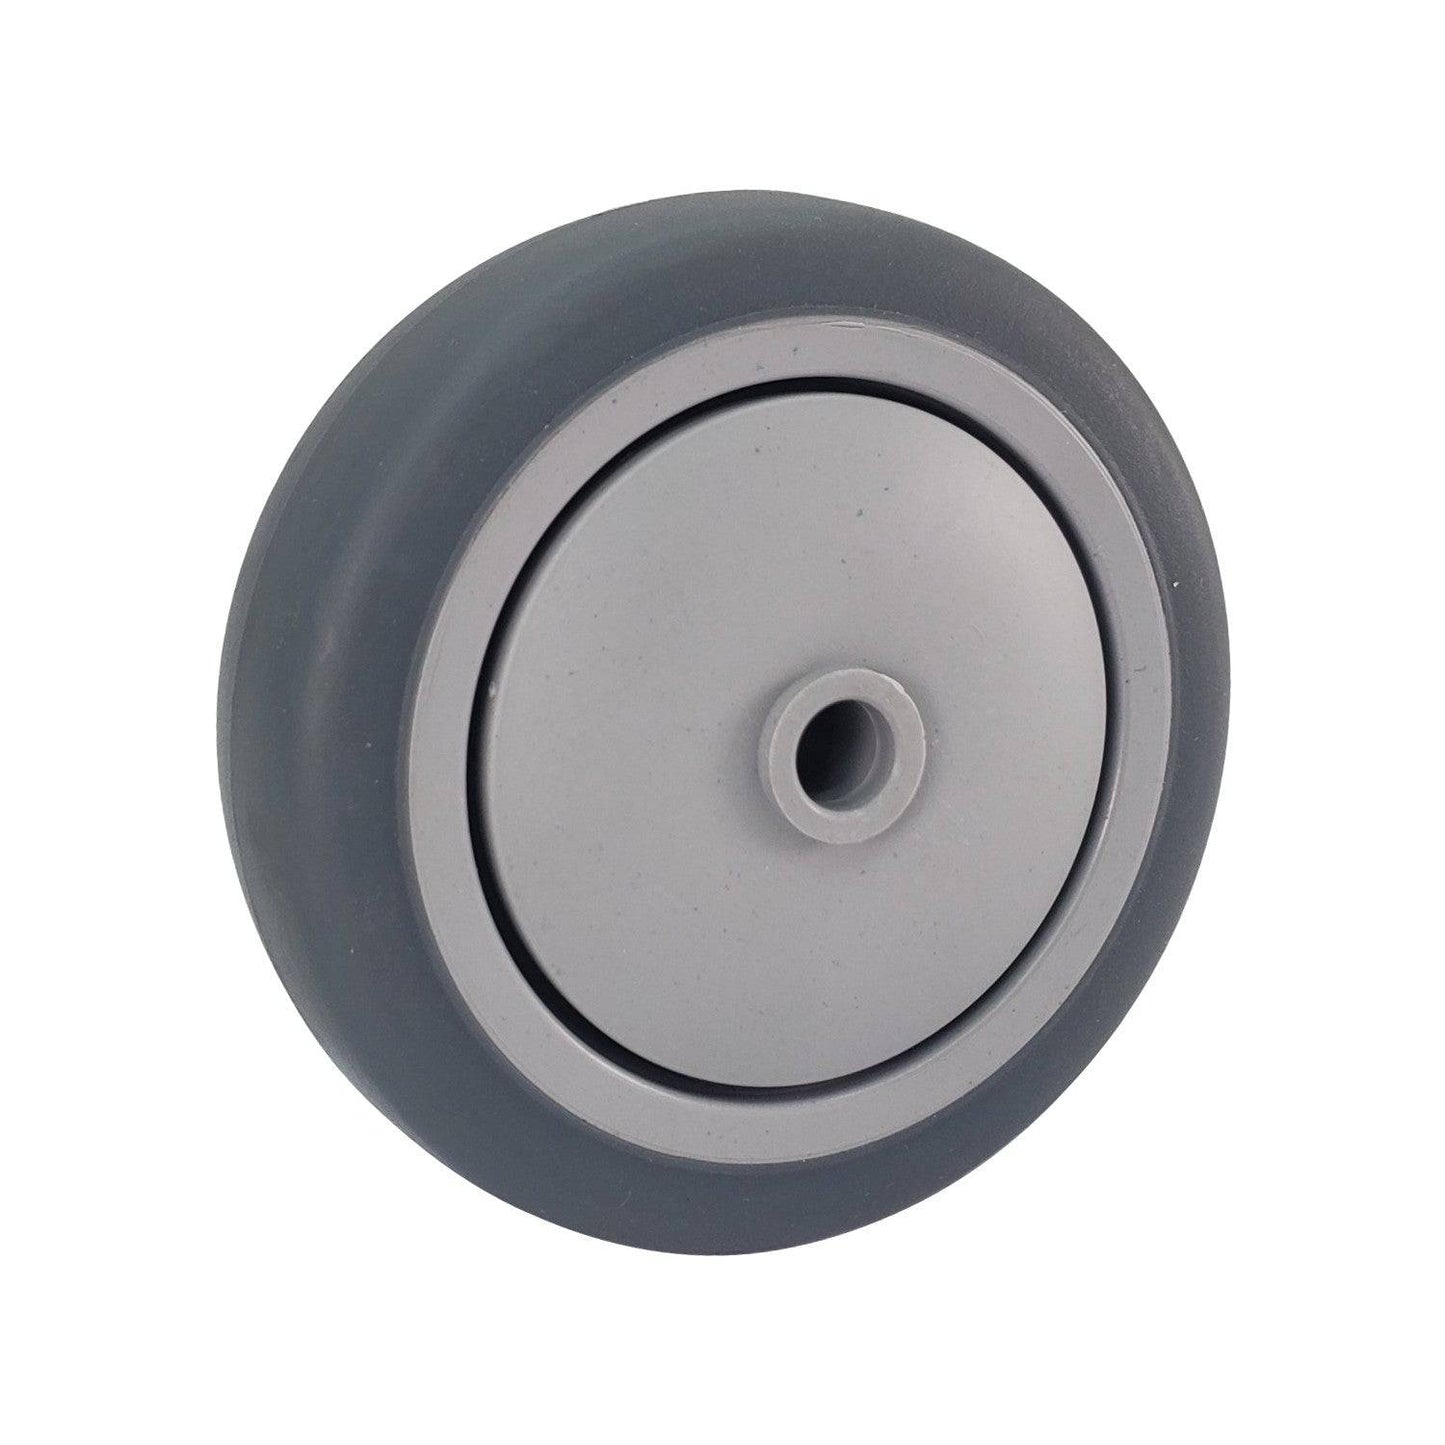 4" x 1-1/4" Thermo-Pro Wheel - 250 lbs. Cap. (4-Pack) - Durable Superior Casters